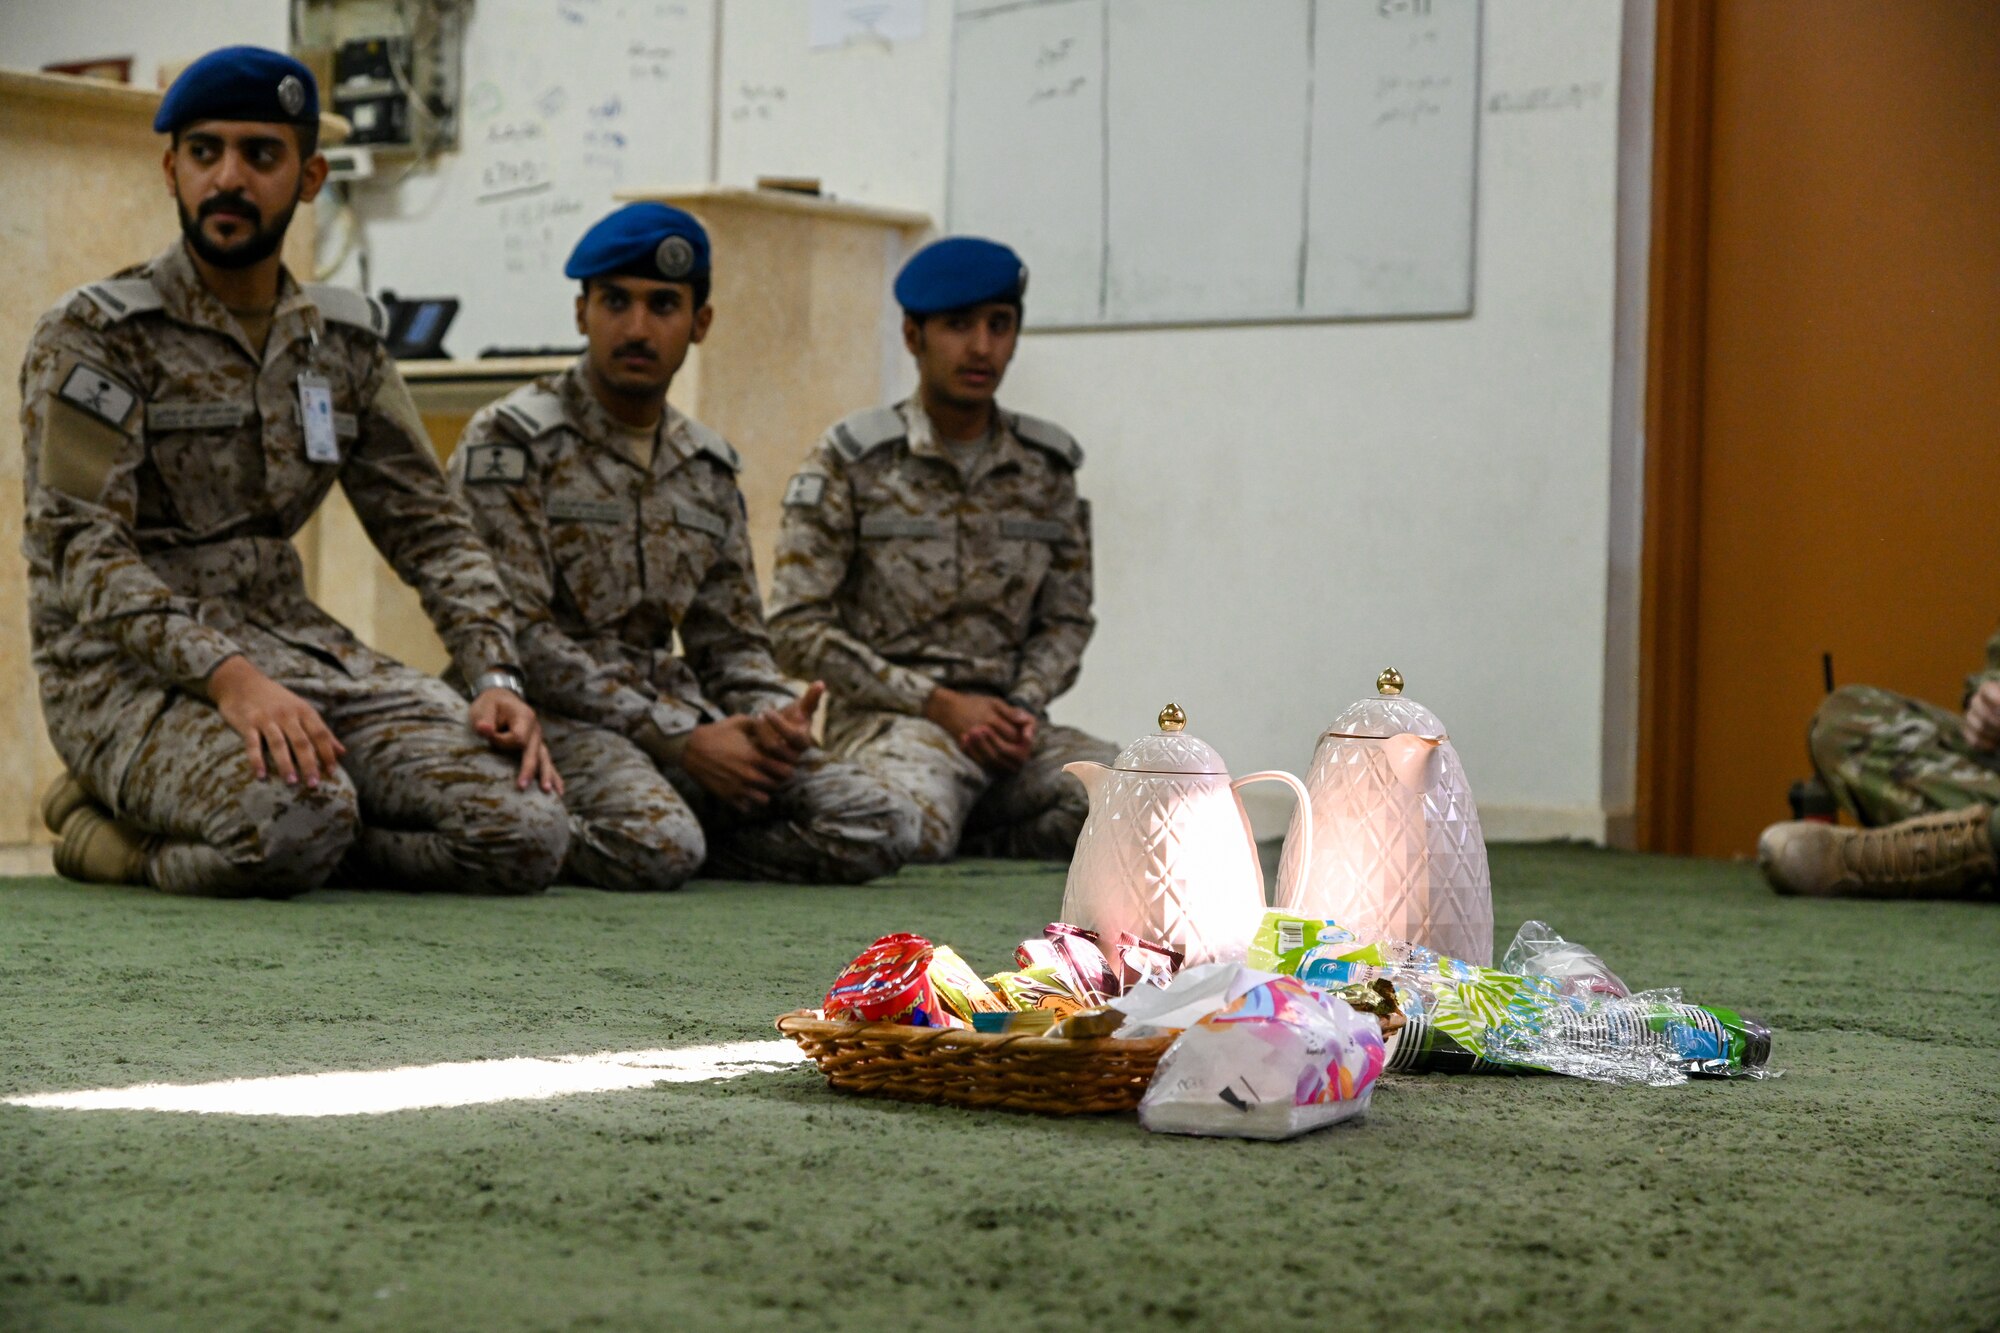 Service members from the Royal Saudi Air Force prepare tea for Airmen from the 378th Expeditionary Civil Engineer Squadron fire department during an integrated training at Prince Sultan Air Base, Kingdom of Saudi Arabia, Nov. 24, 2021. The training included a briefing from the RSAF fire chief on the operational structure of the RSAF fire department. (U.S. Air Force photo by Staff Sgt. Christina Graves)